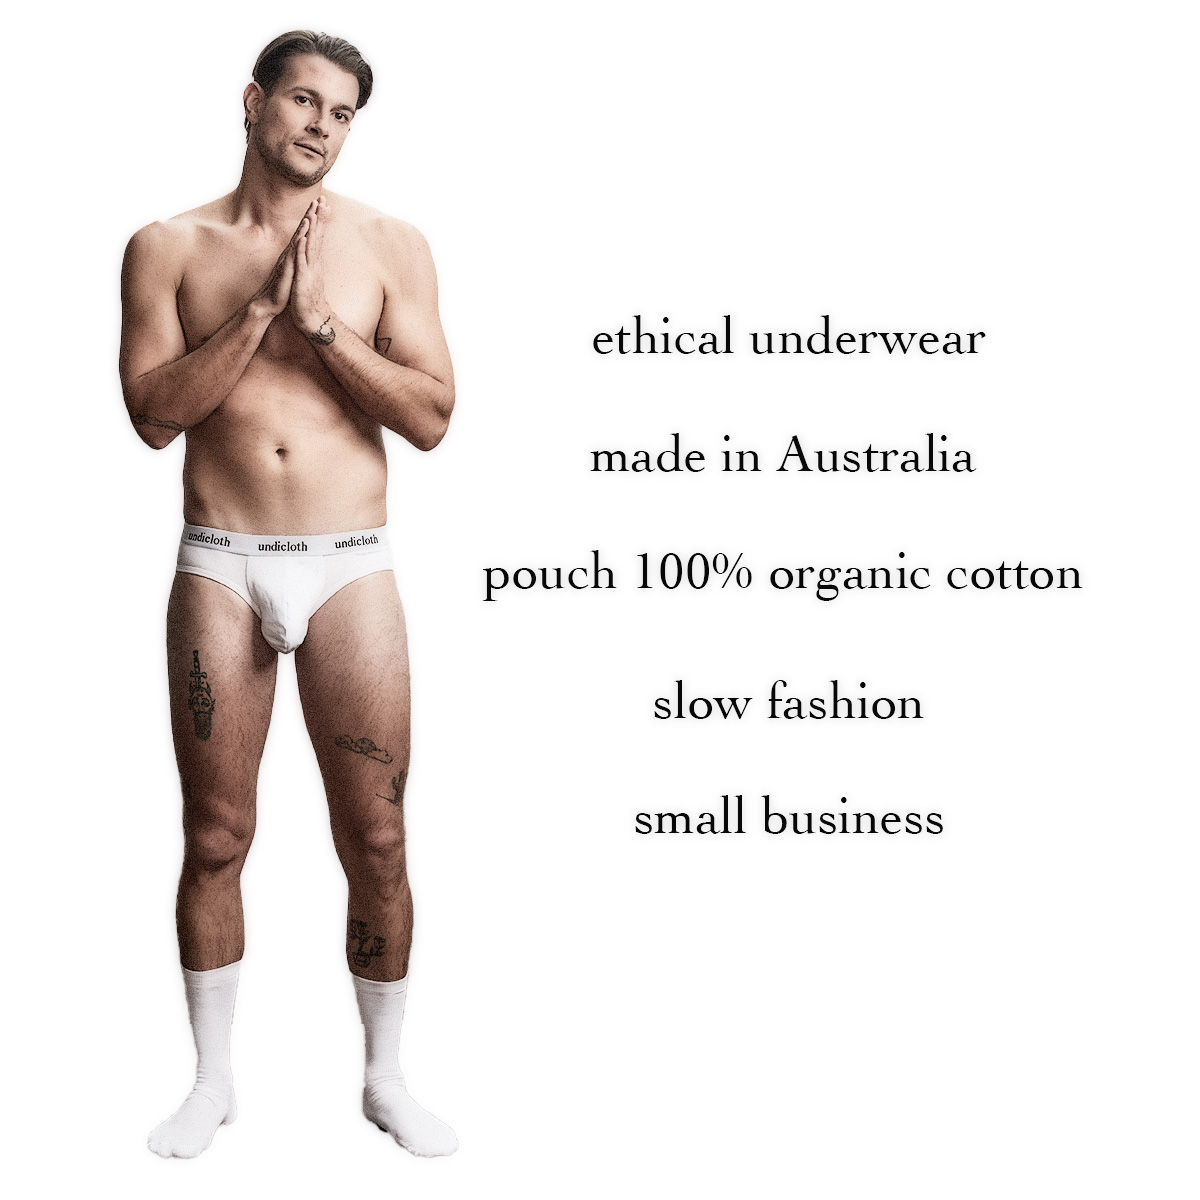 Ethical, made in Australia, 100% organic cotton pouch, slow fashion and we are a small business.

#undicloth #mensunderwear #organiccotton #slowfashion #smallbusiness #australianmade